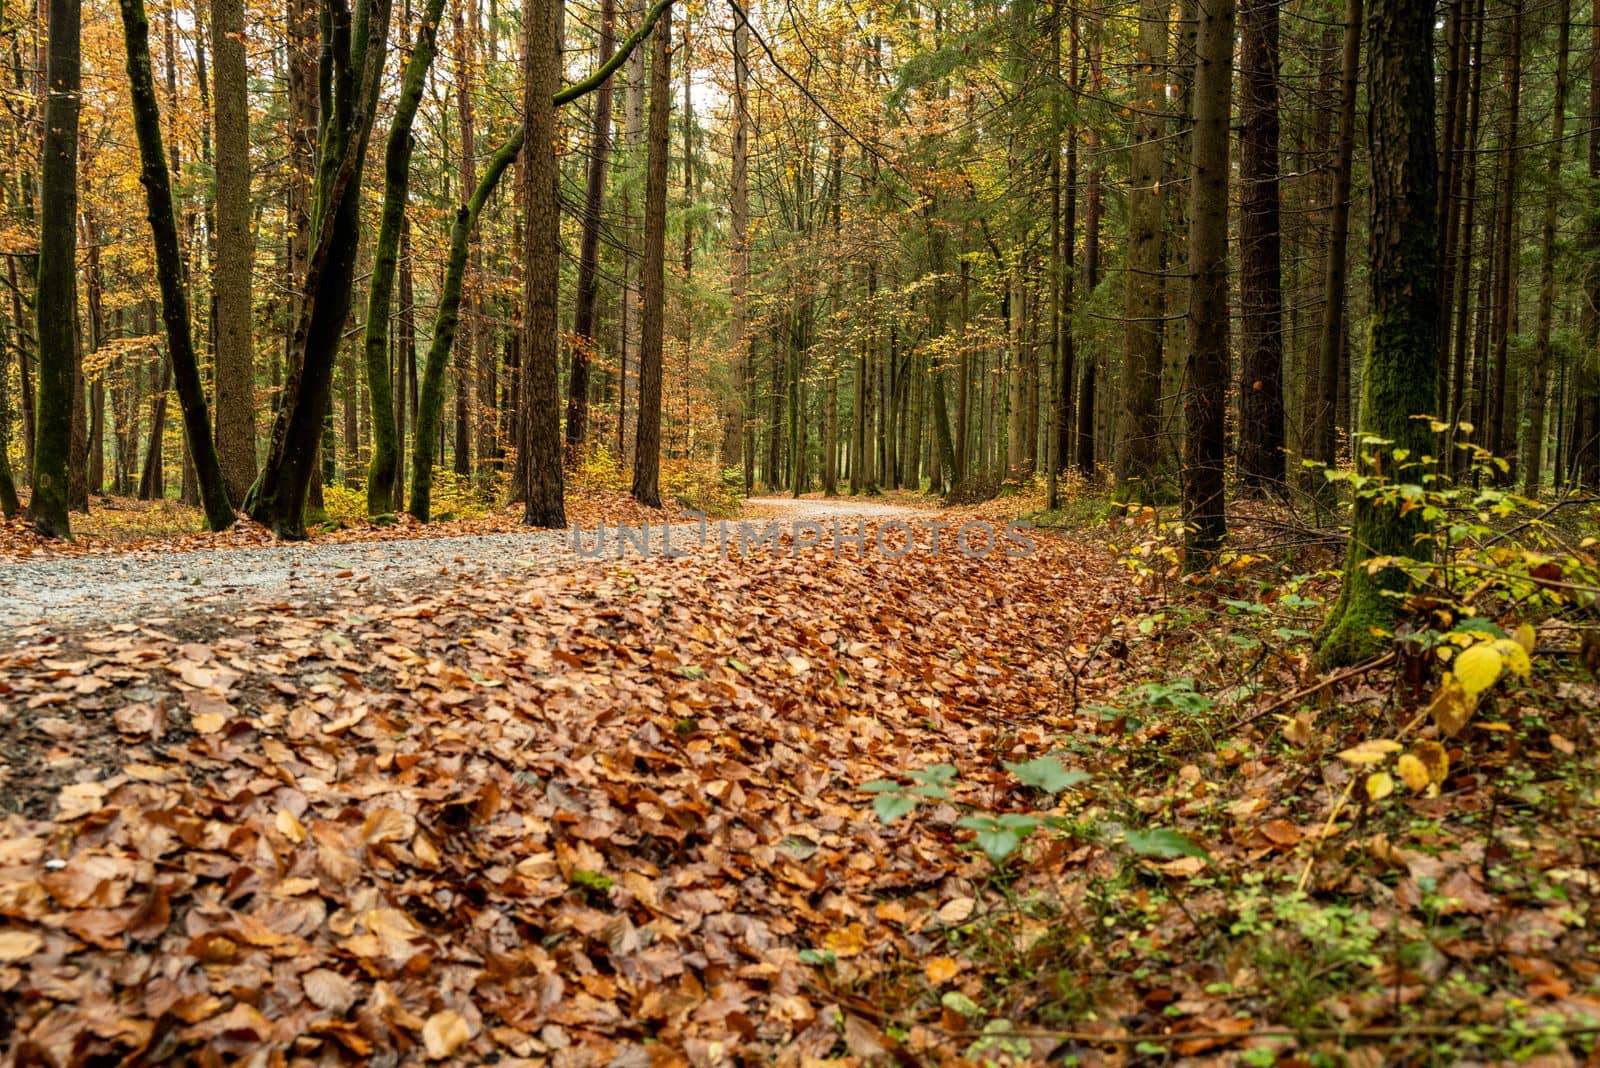 A forest road leads across a colorful autumn forest with many leaves already lying on the ground.